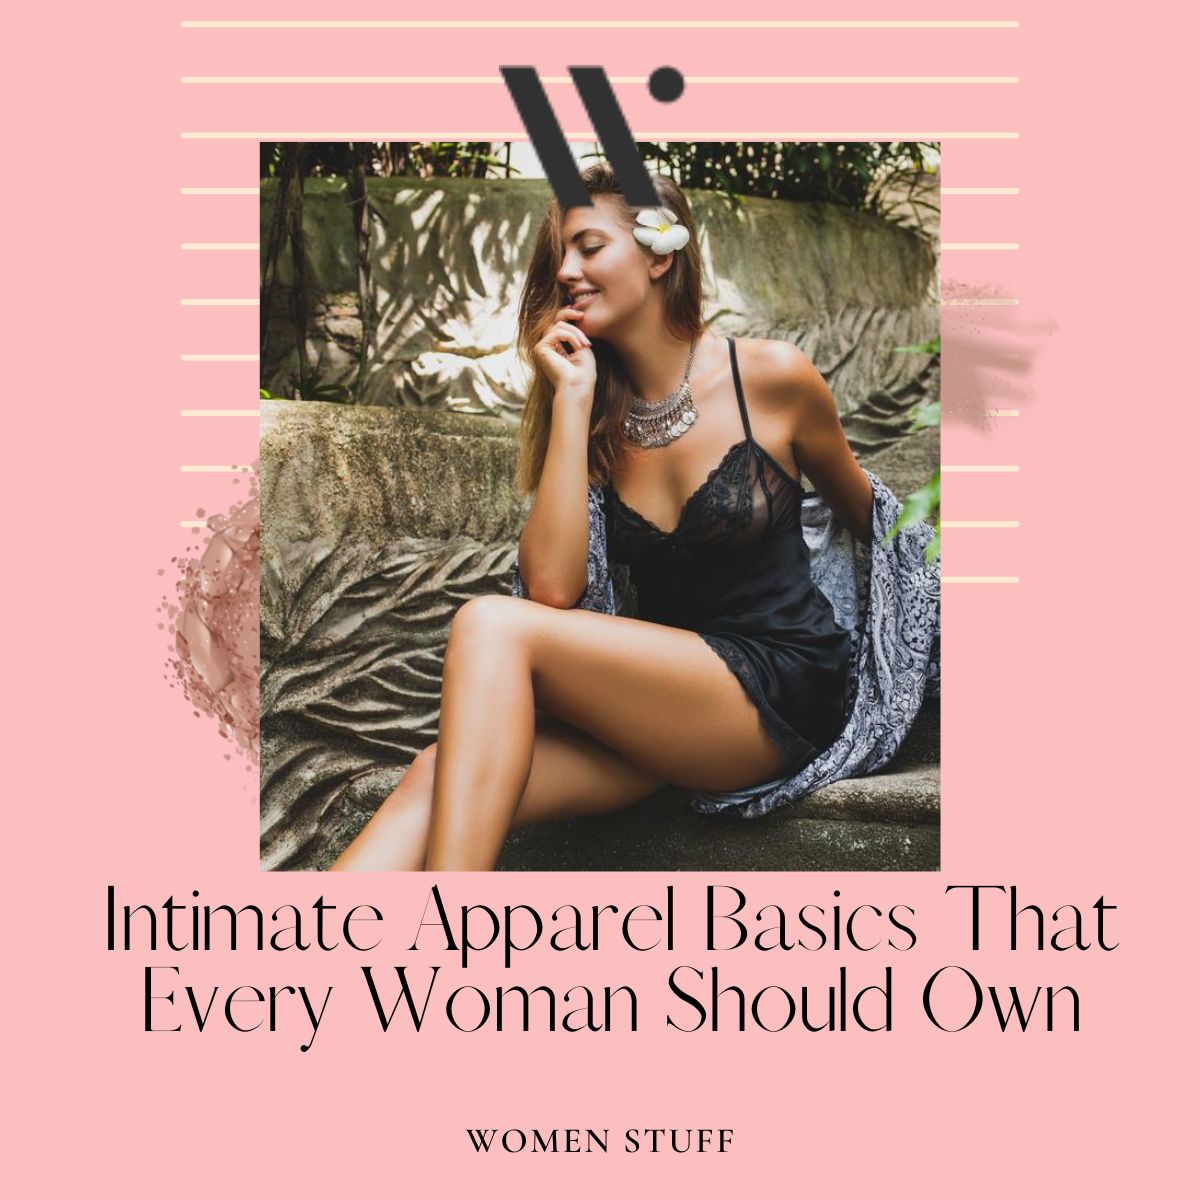 7 Intimate Apparel Basics That Every Woman Should Own - Women Stuff